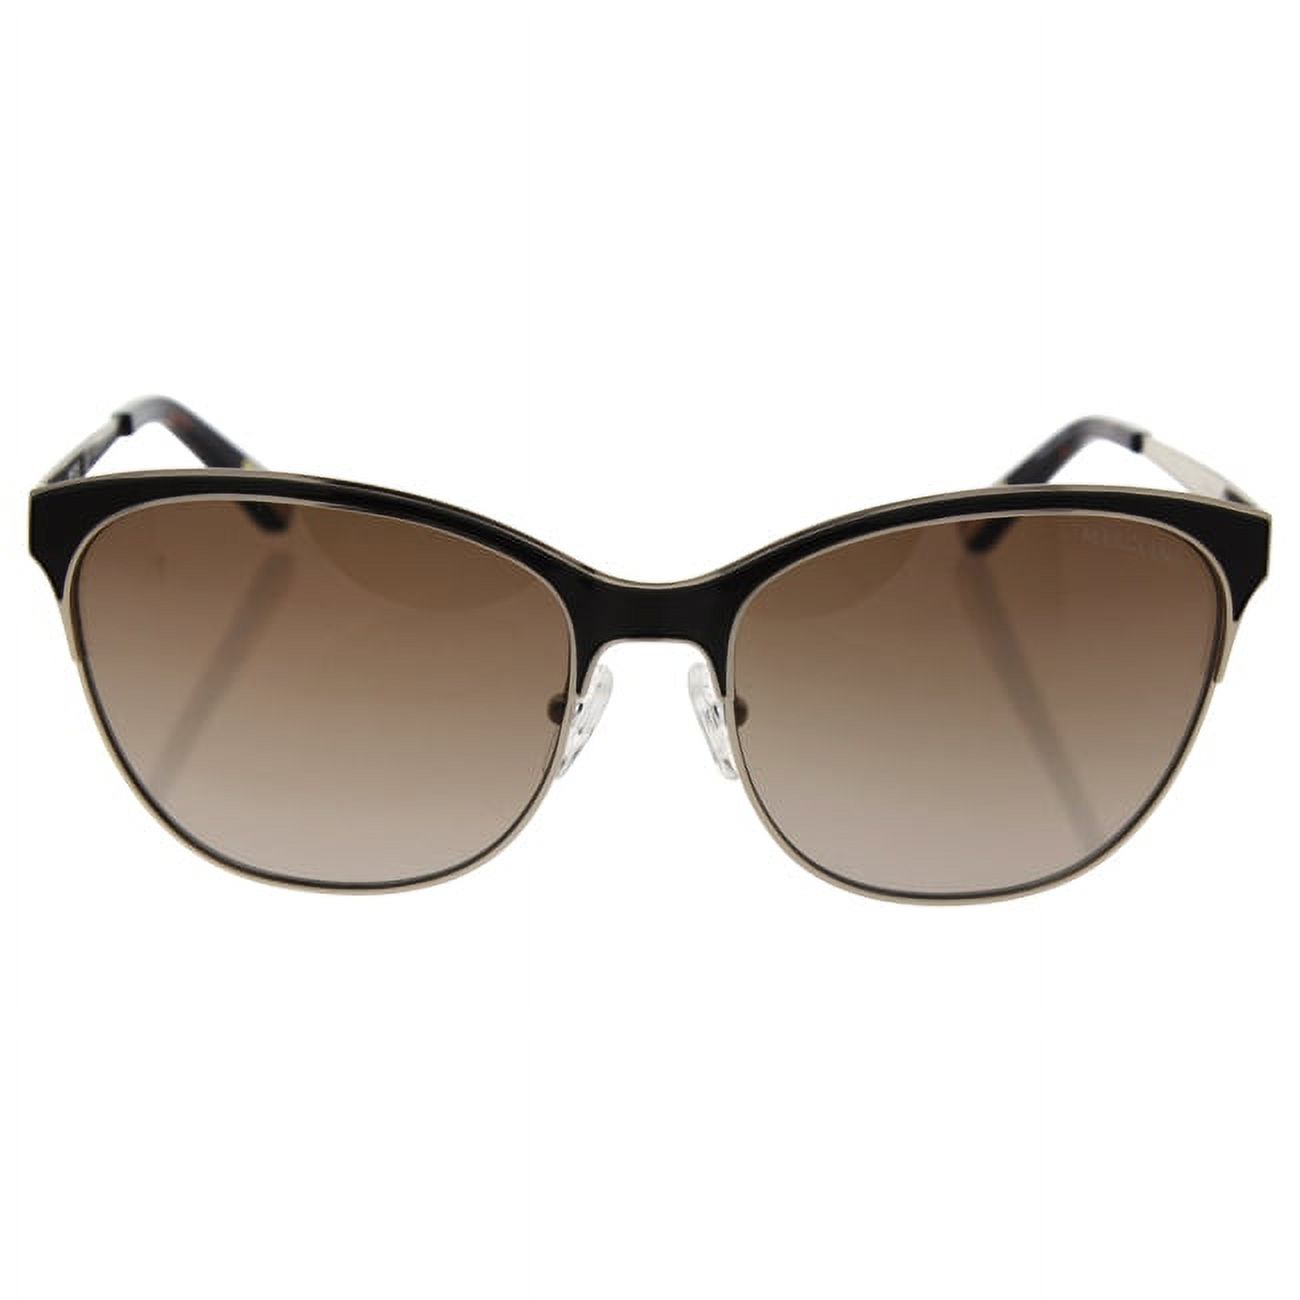 Sunglasses Guess By Marciano GM 0750 48F Shiny Dark Brown / Gradient - image 1 of 3